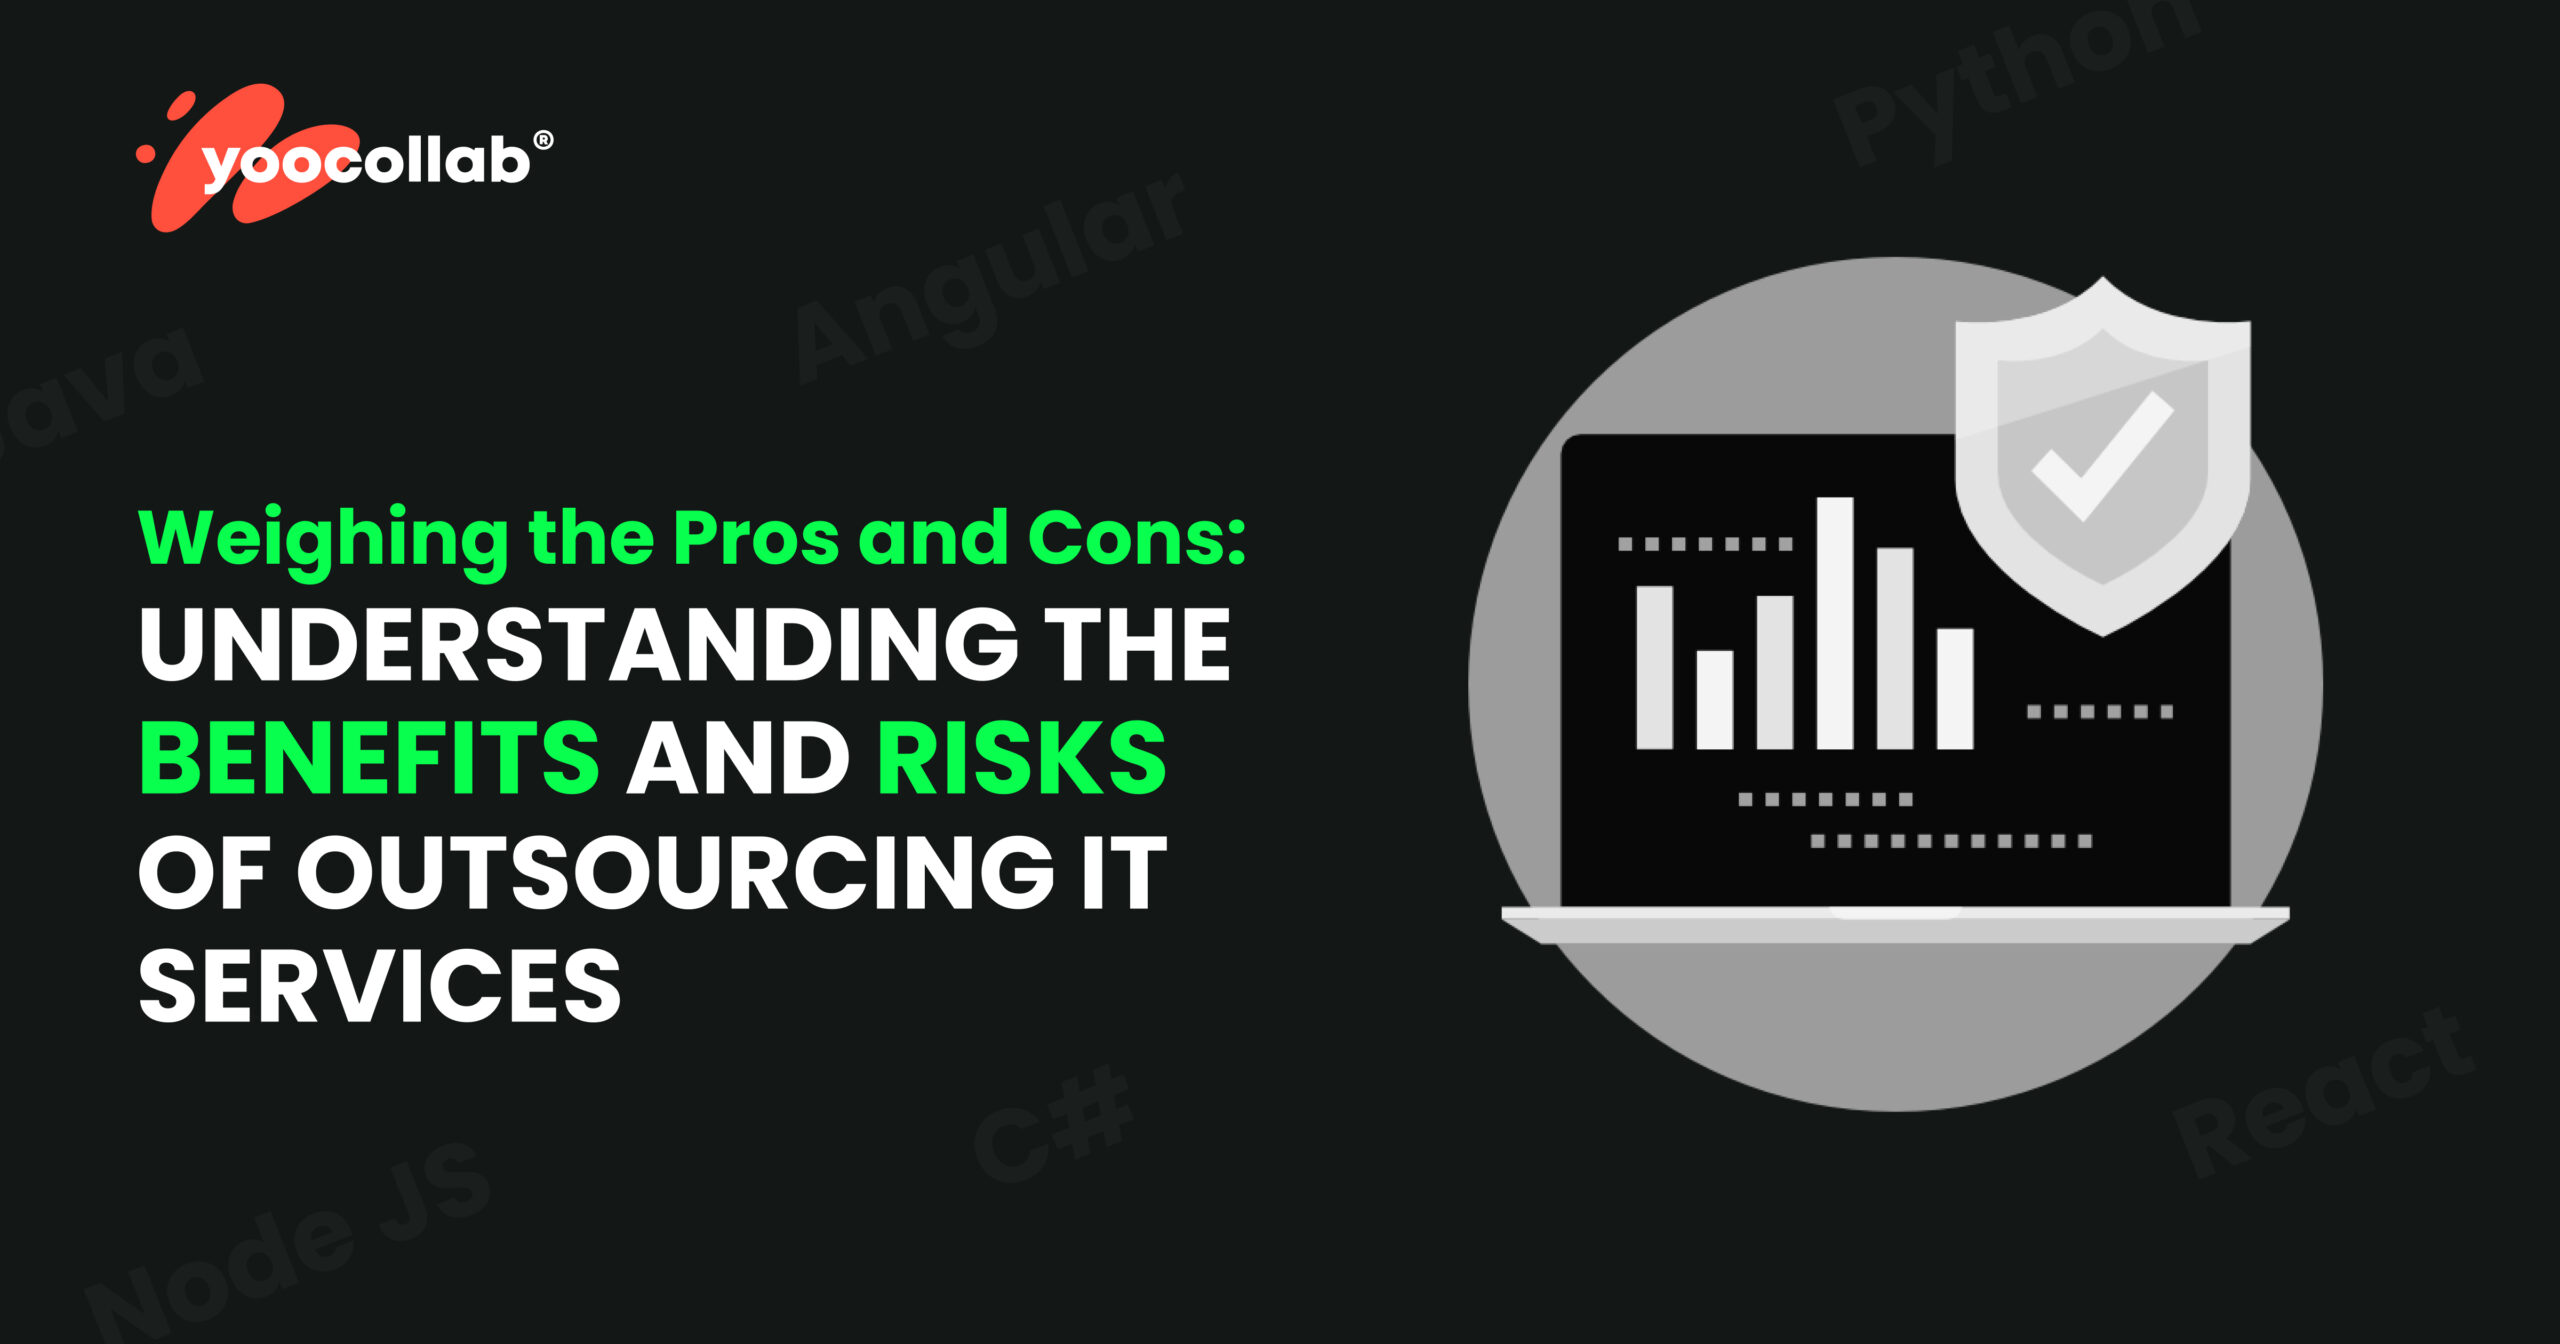 Weighing the Pros and Cons of Outsourcing IT Services